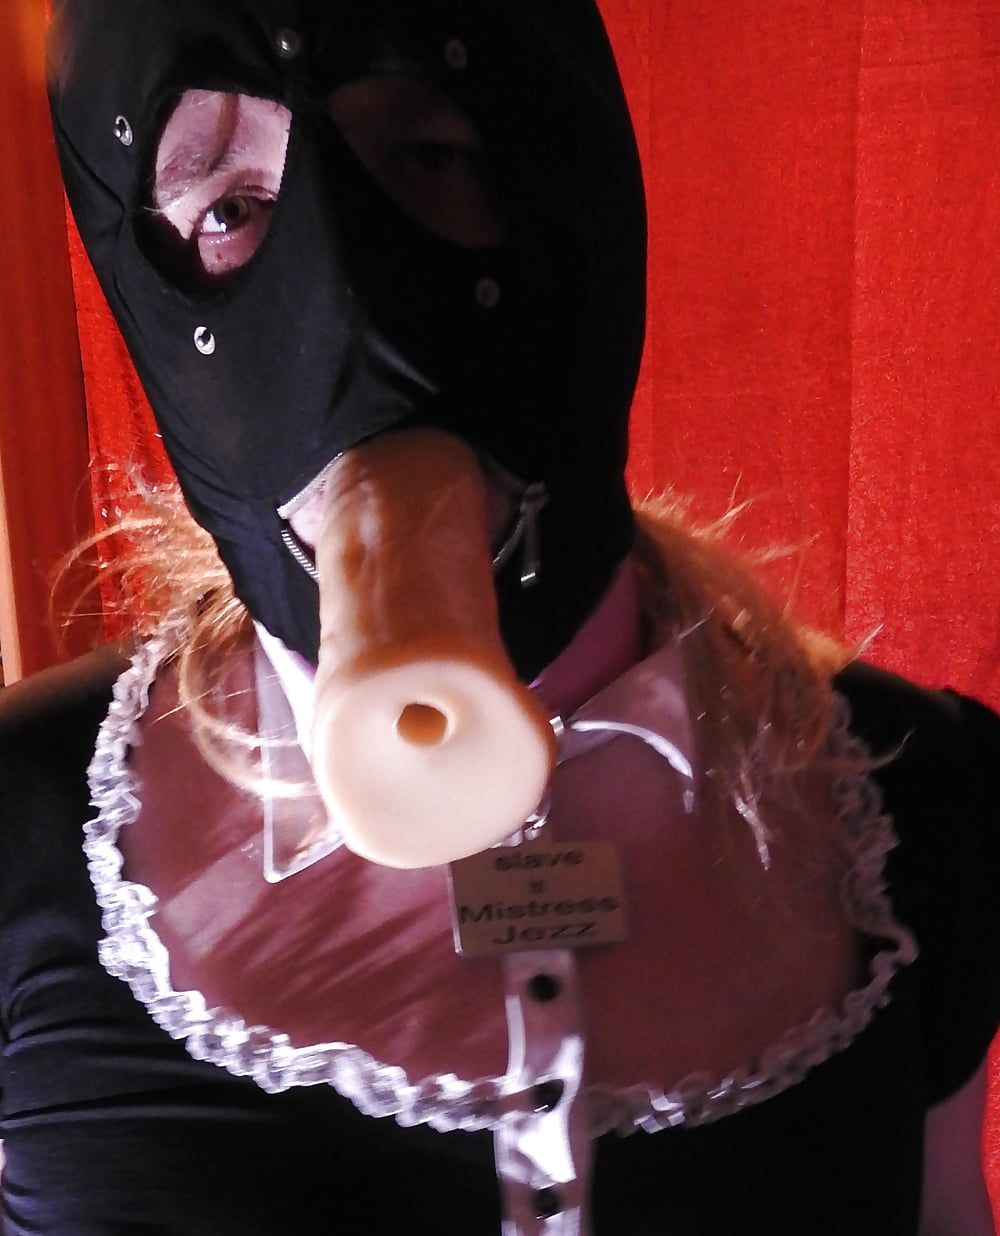 Task13 - Sissy Dance with Dildio in Mouth #7